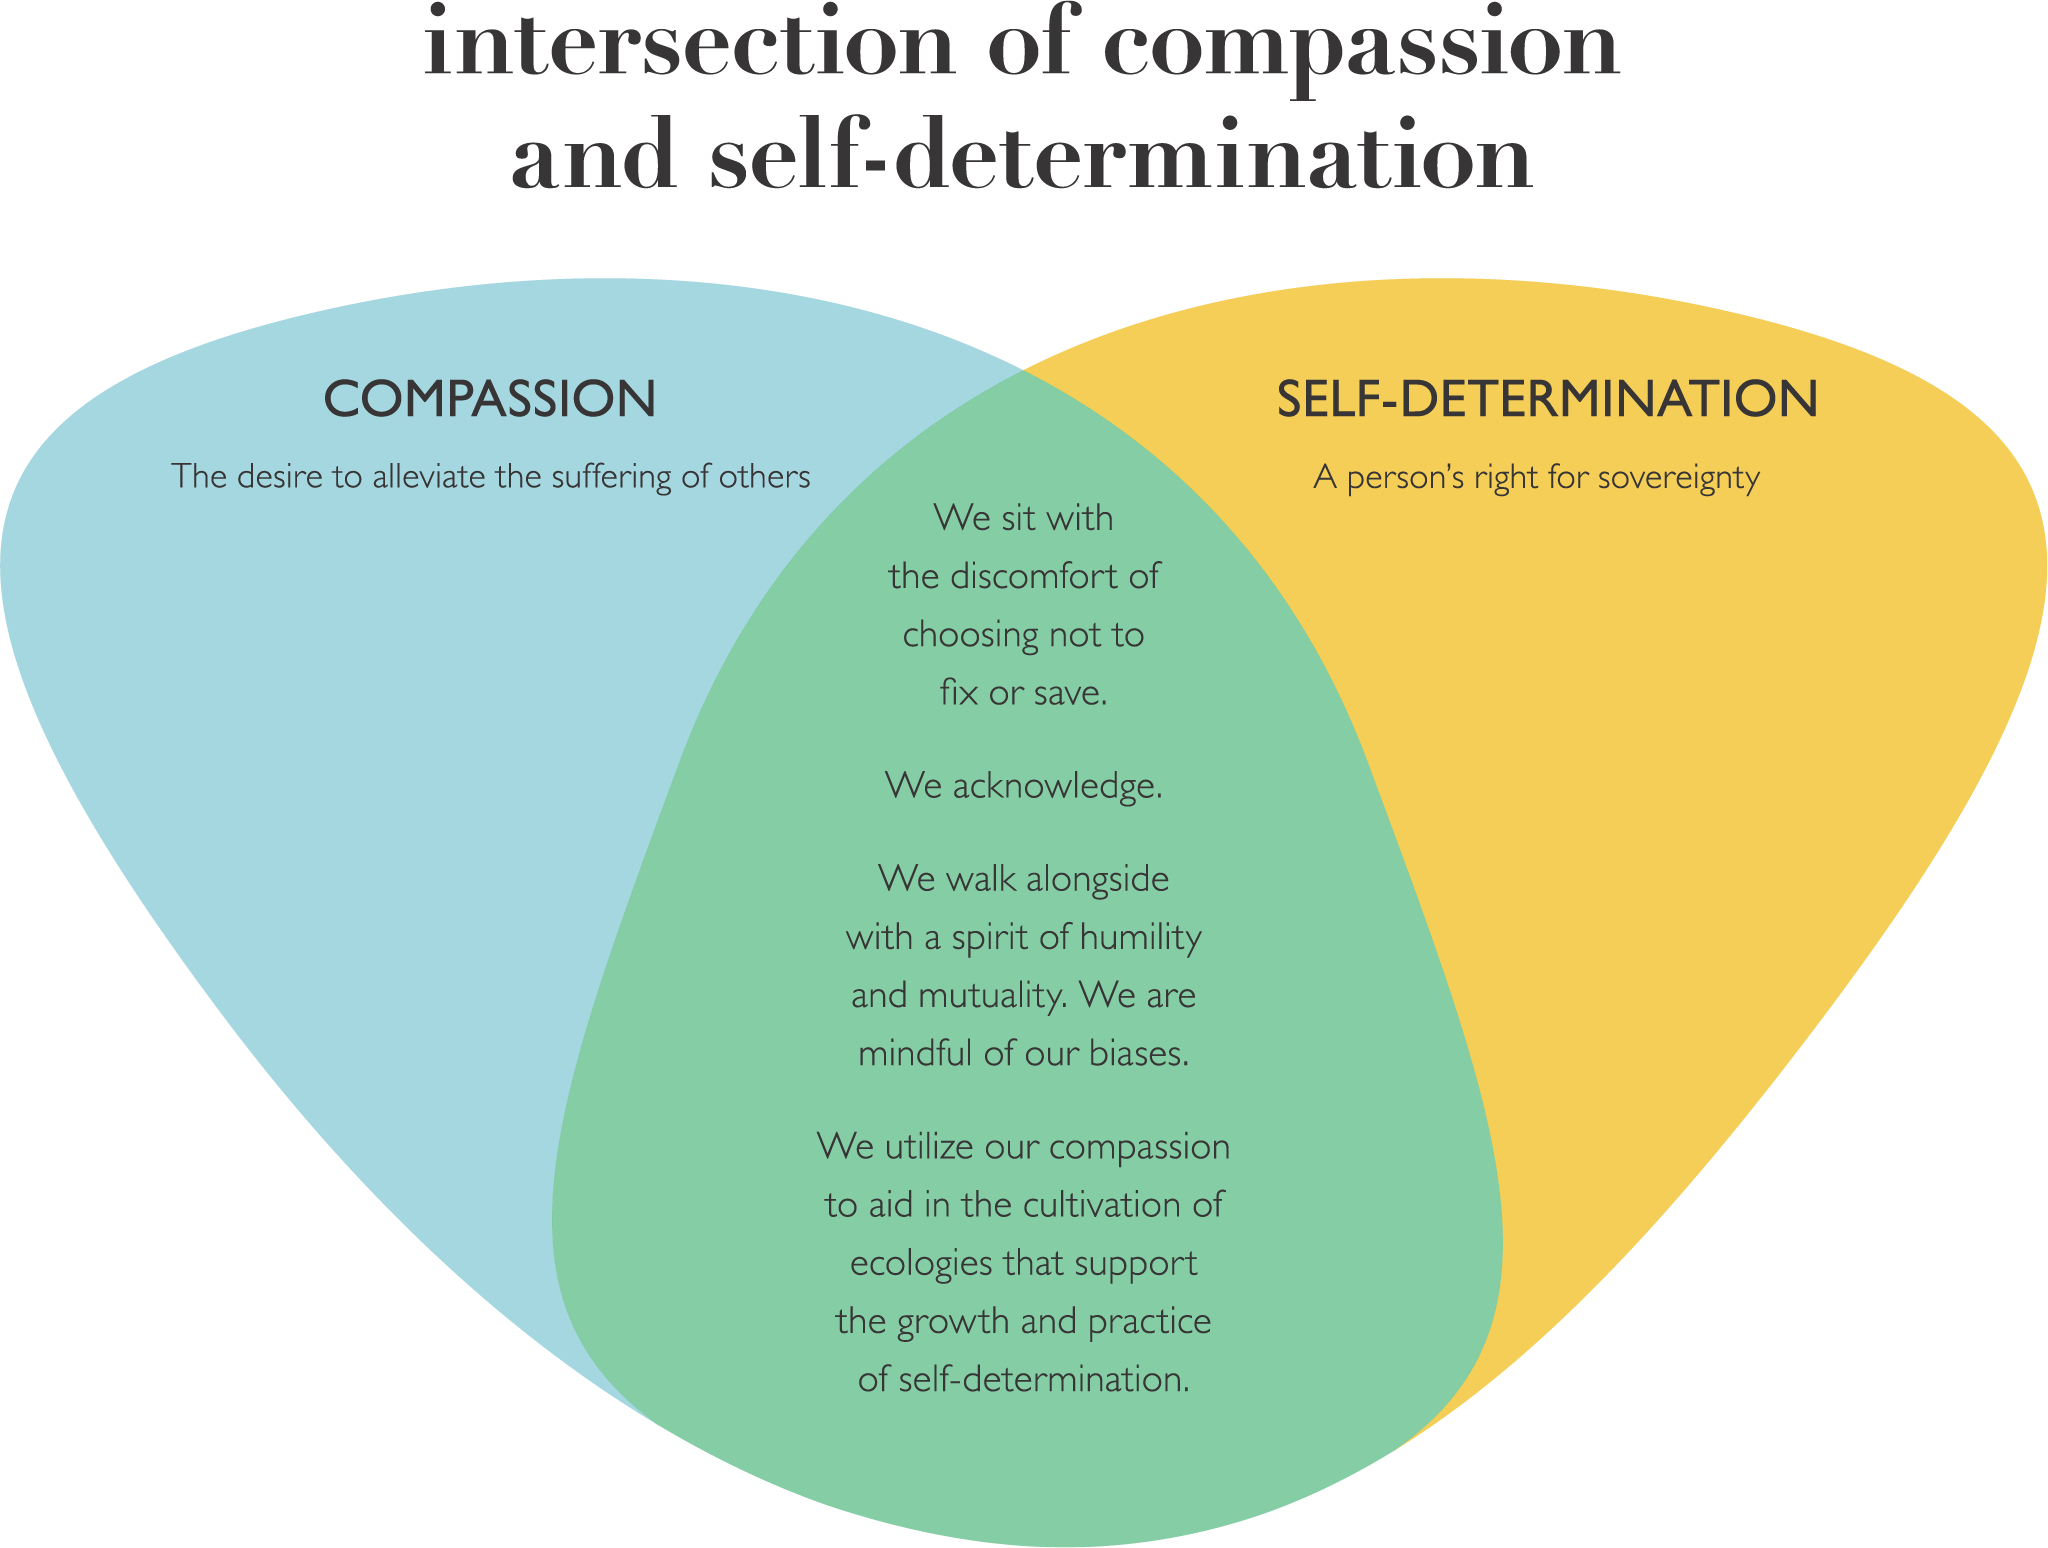 Intersection of compassion and self-determination